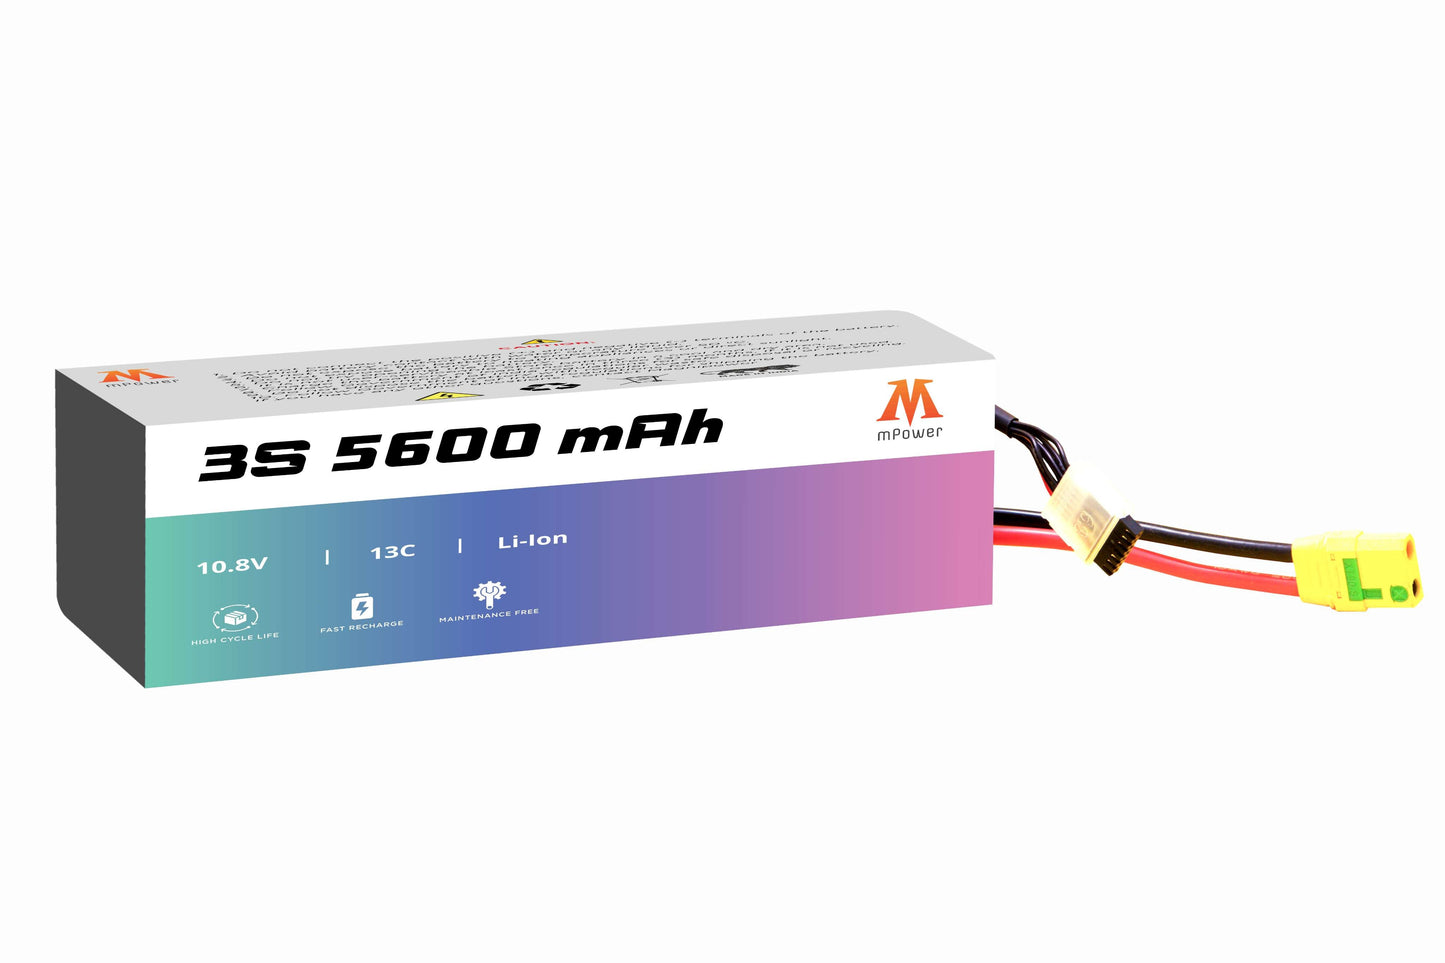 mPower 3S 5600mAh Lithium-Ion Battery for Surveillance Drones